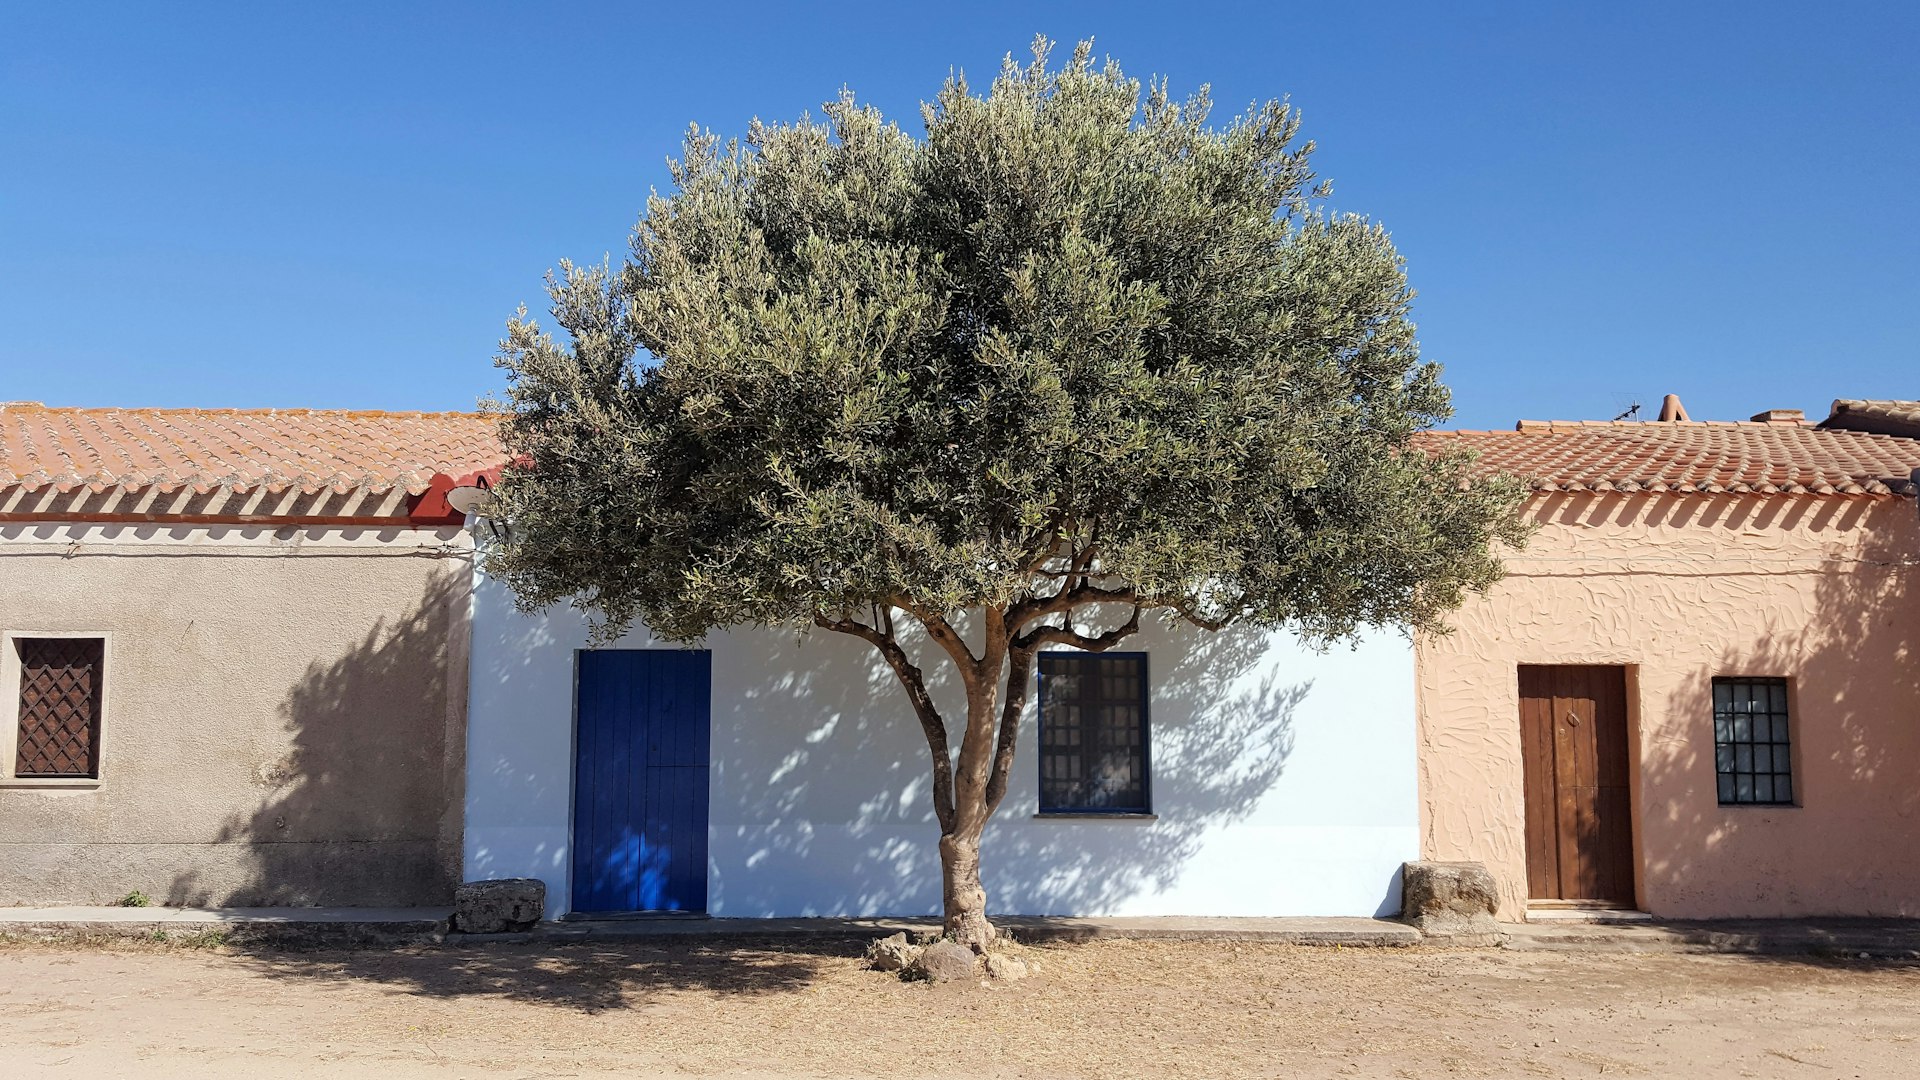 Rural cottages in far west Sardinia with an olive tree